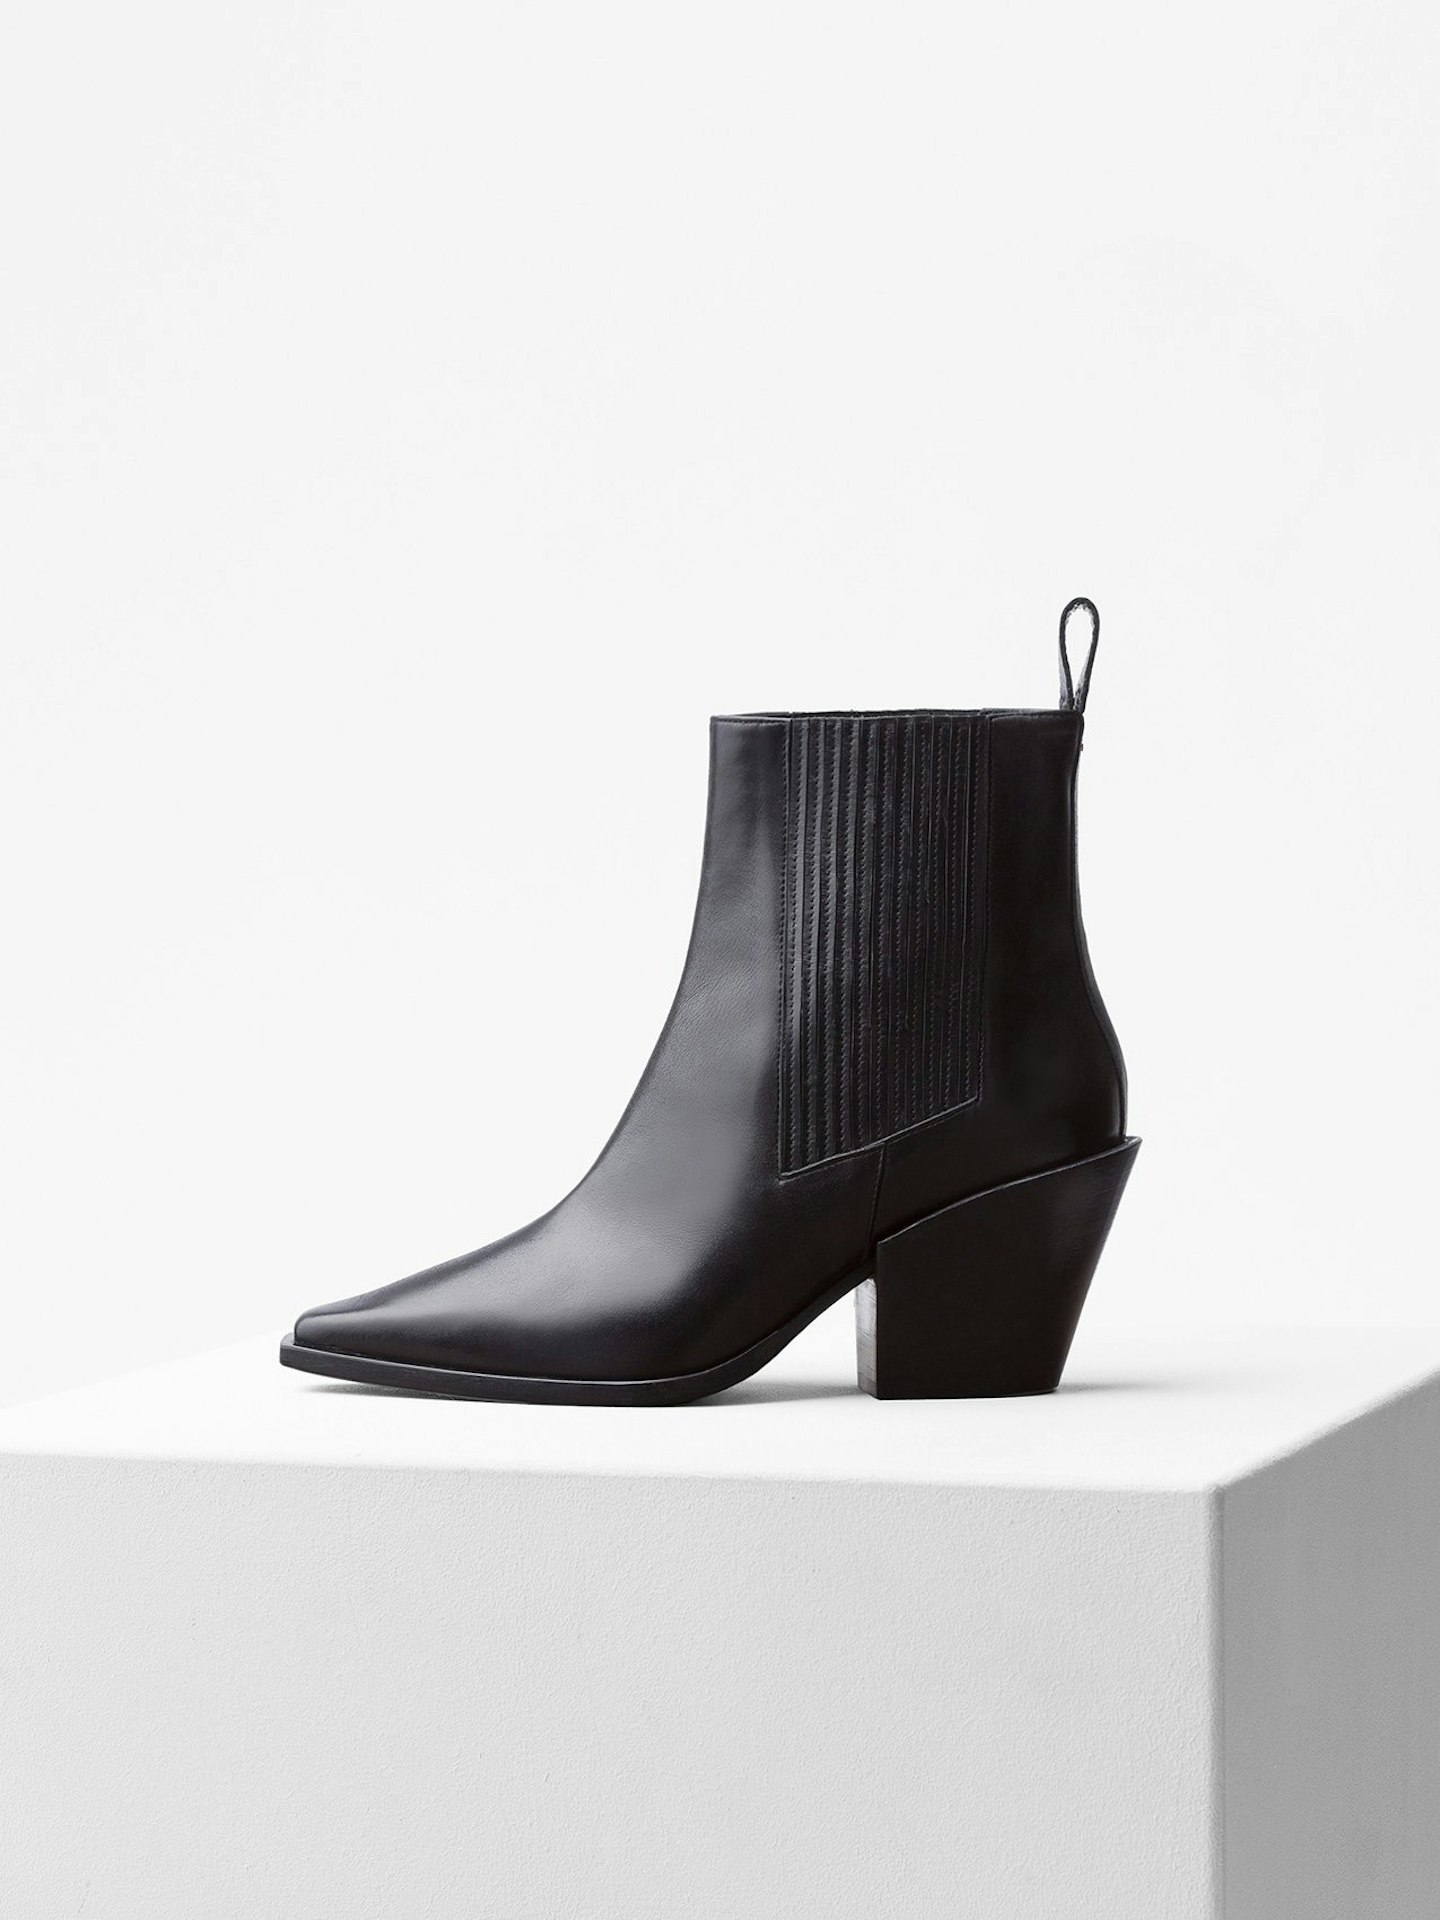 Aeyde, Kate Black Calf Boots, £294